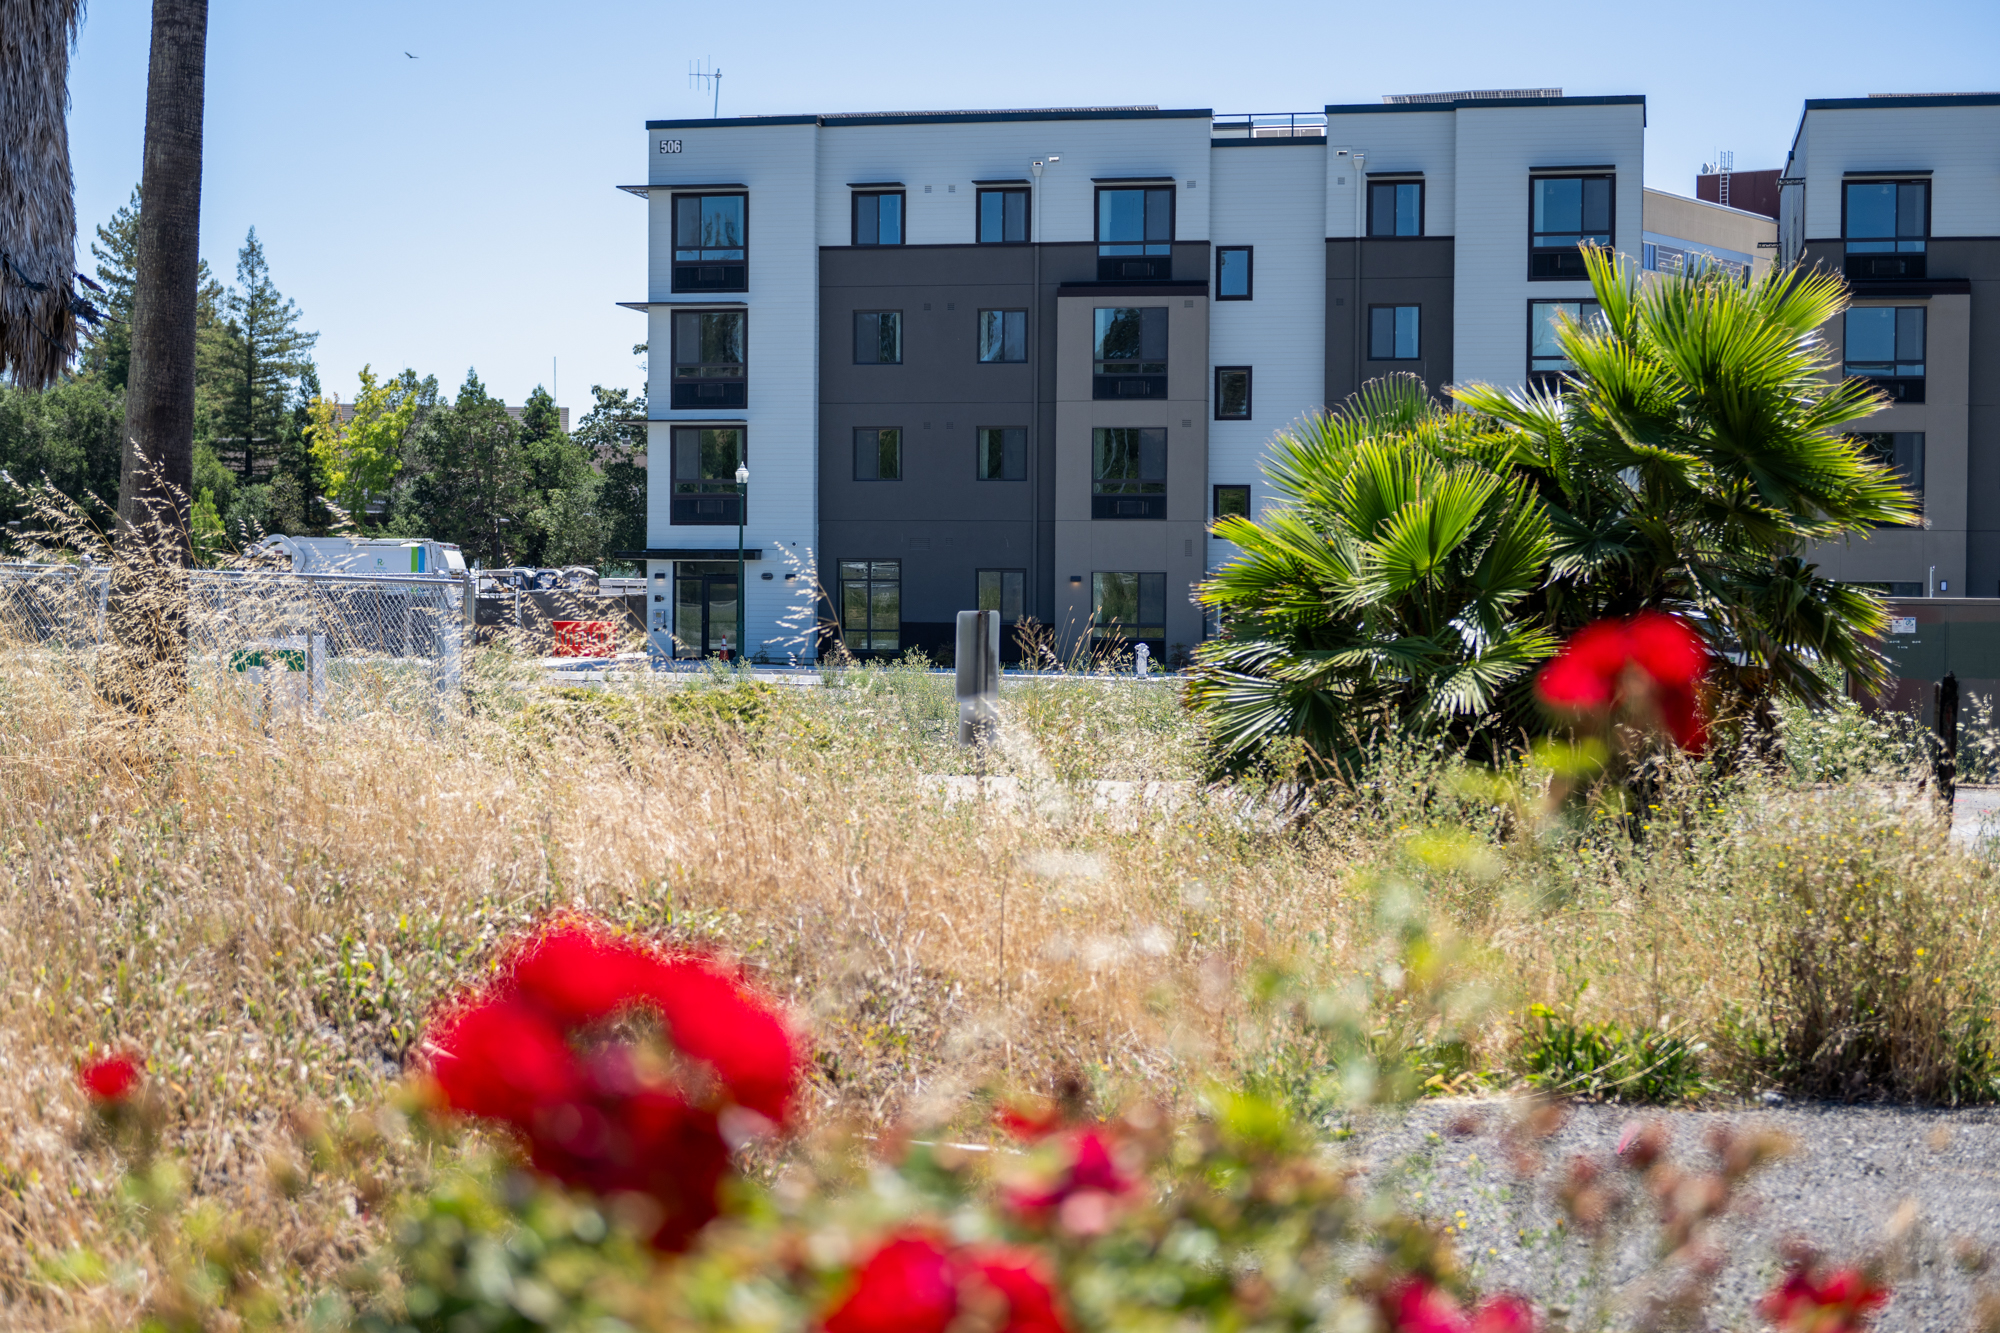 A new condo building is seen through the overgrown grasses of the lot across the street.